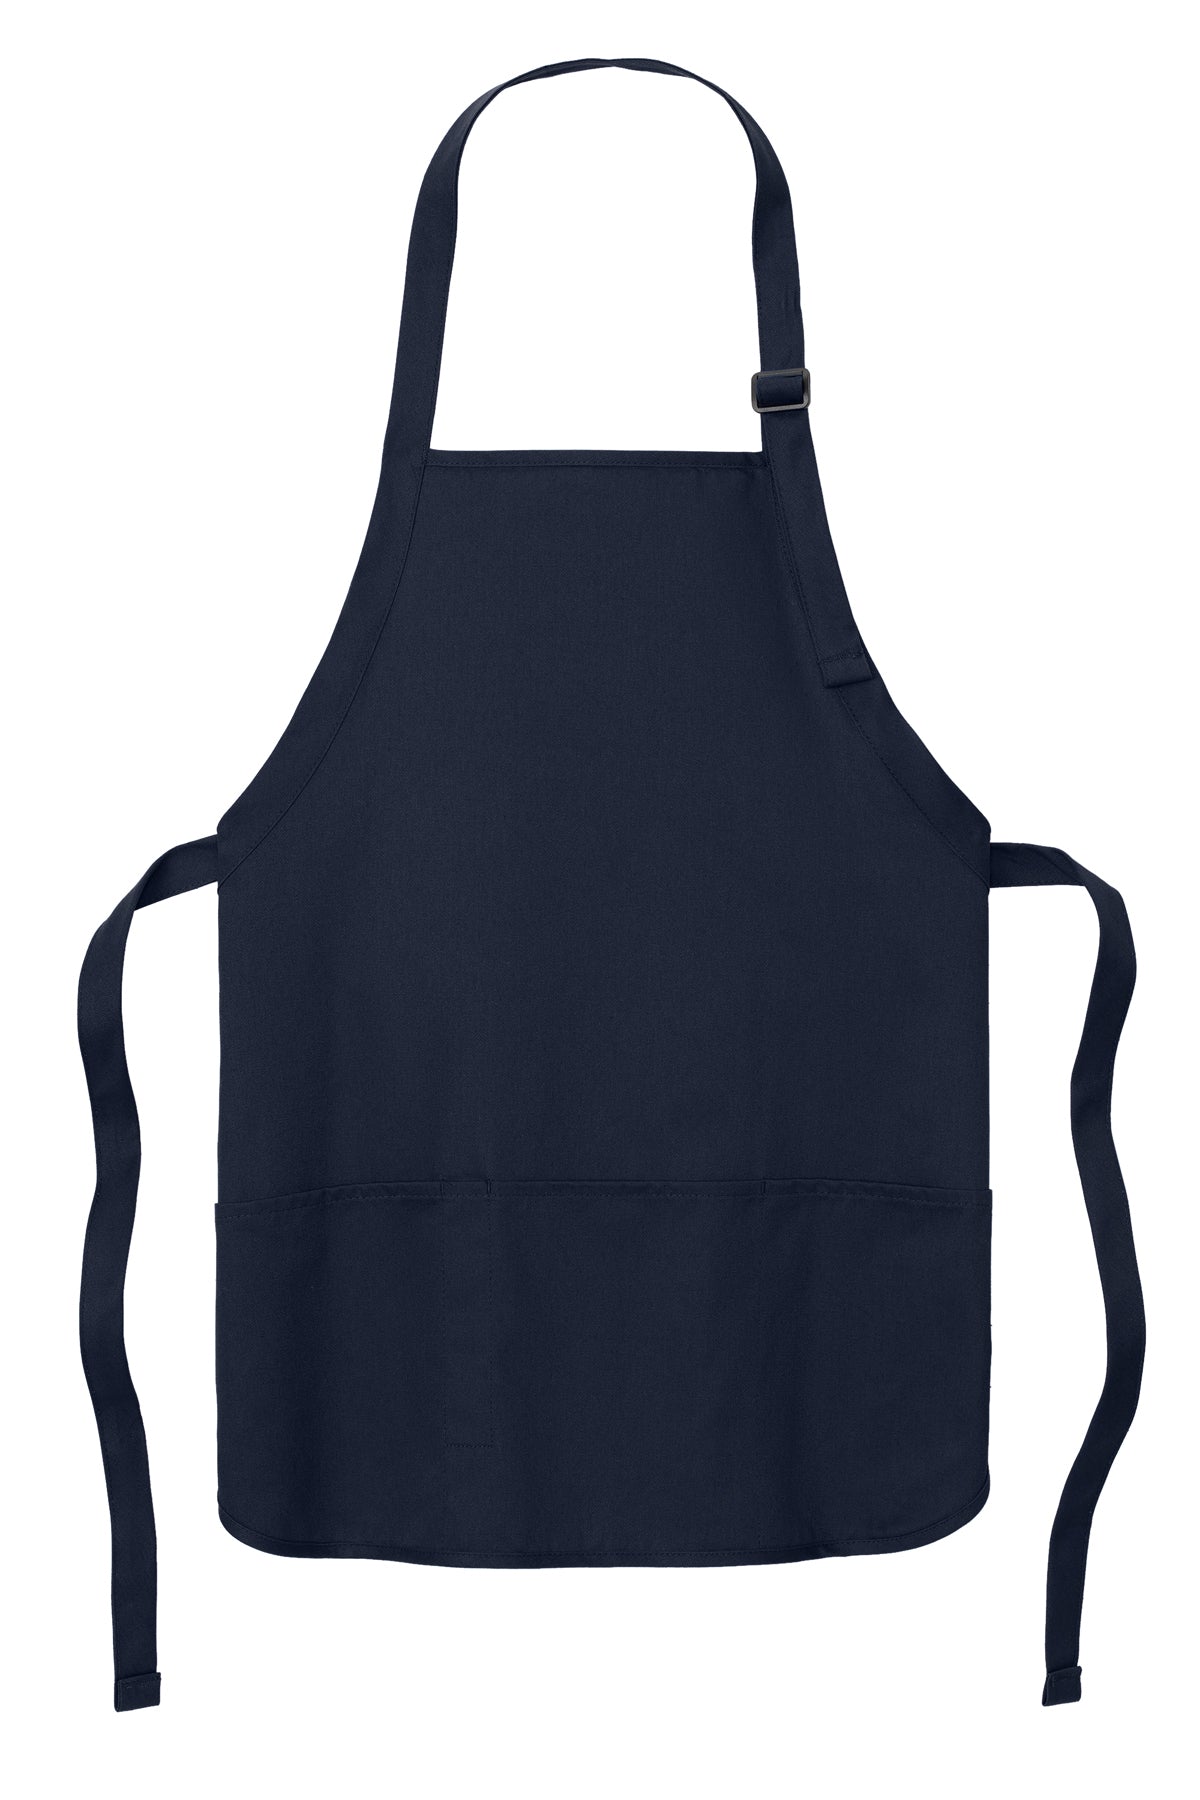 Port Authority Medium-Length Apron with Pouch Pockets A510 Navy